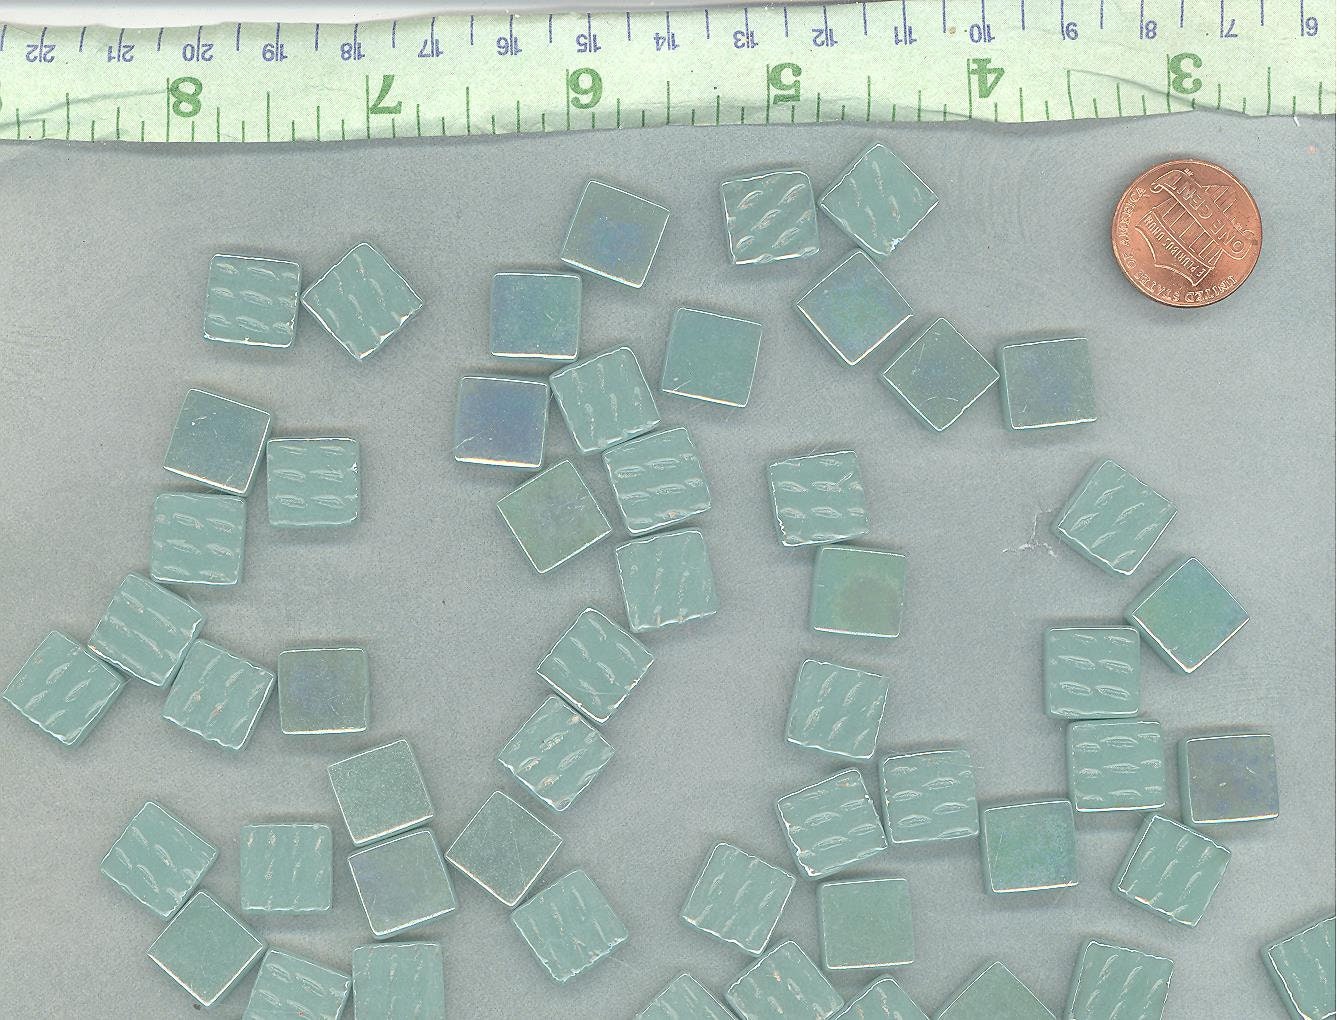 Light Teal Iridescent Glass Square Mosaic Tiles - 12mm - Opaque Glass Solid Color - 50g - Approx 35 Tiles